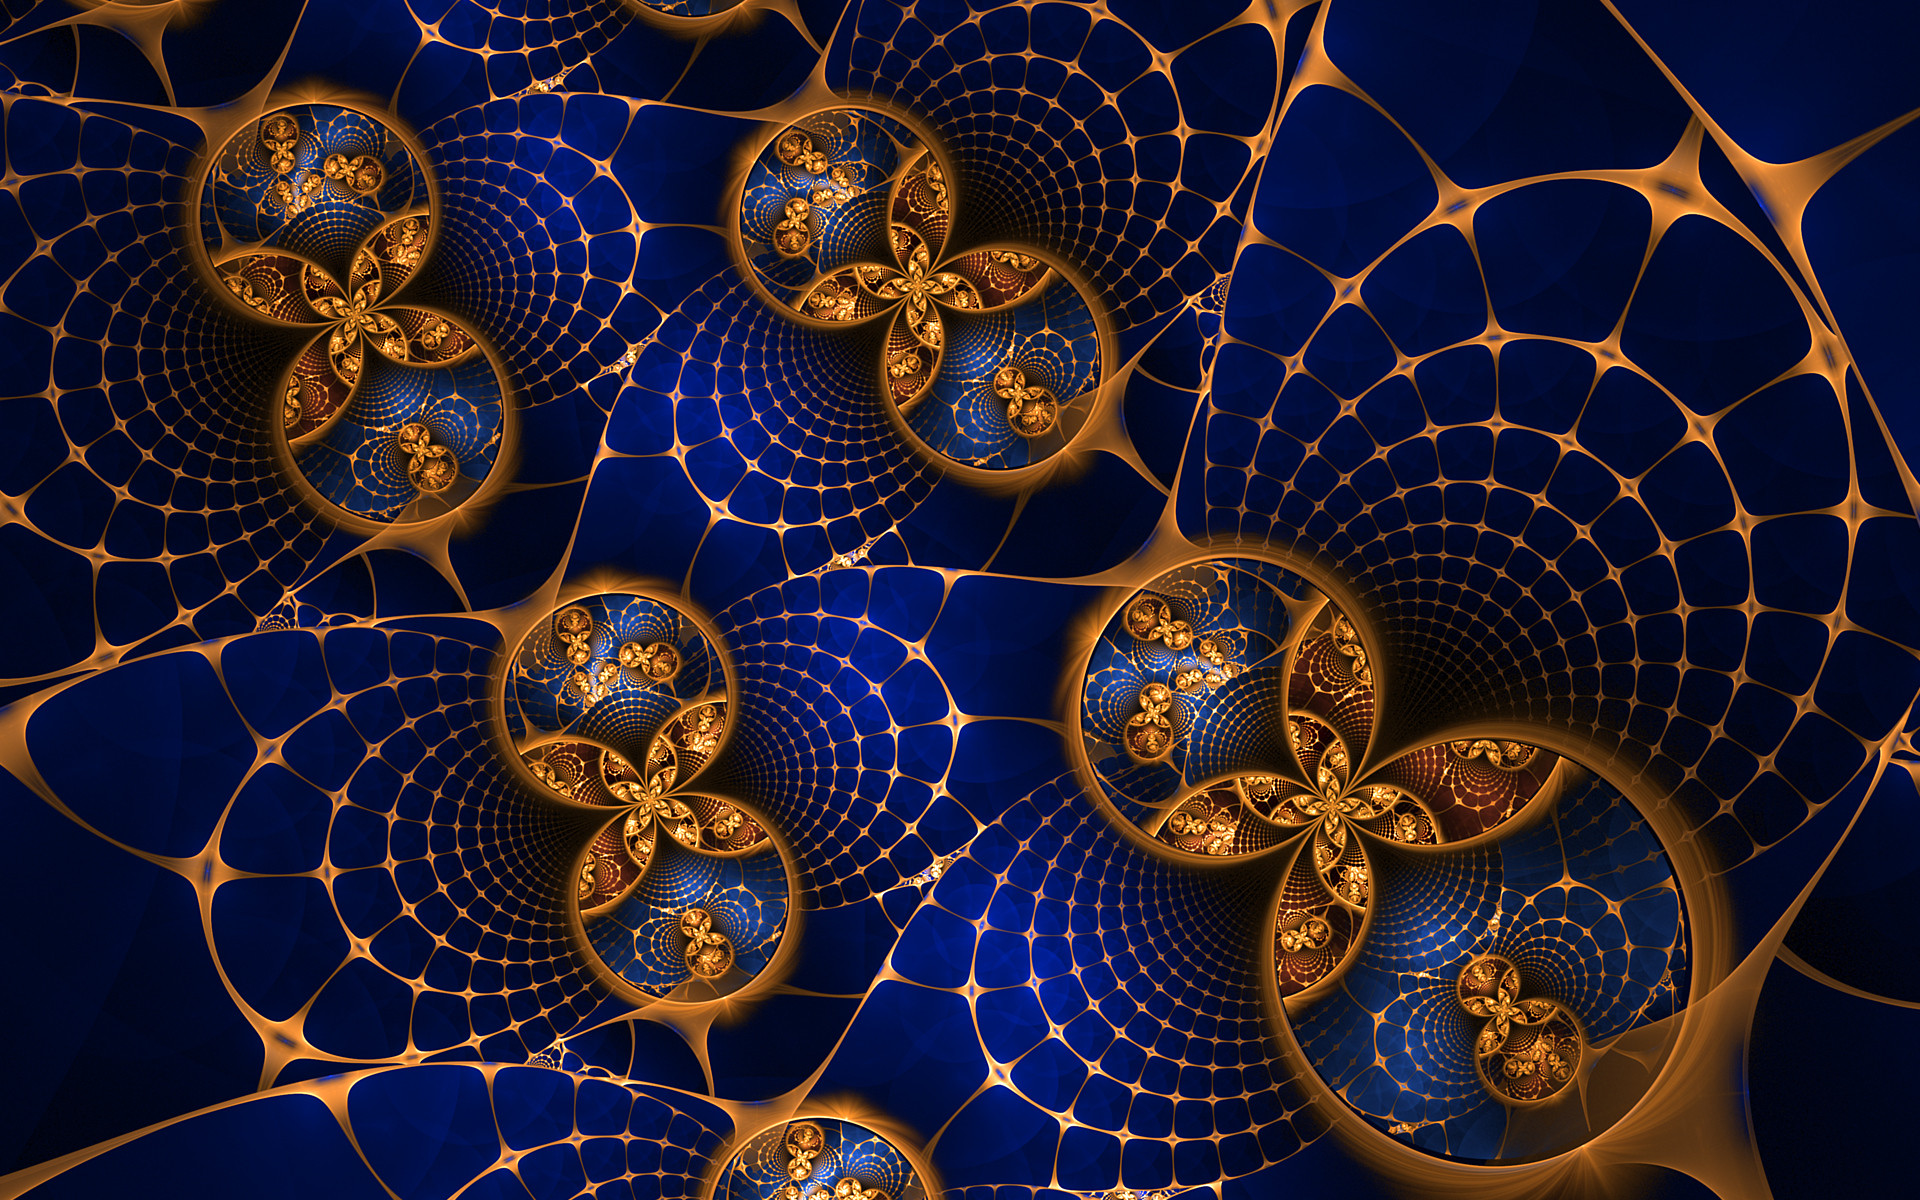 1920x1200 Blue and Gold by SuicideBySafetyPin on DeviantArt